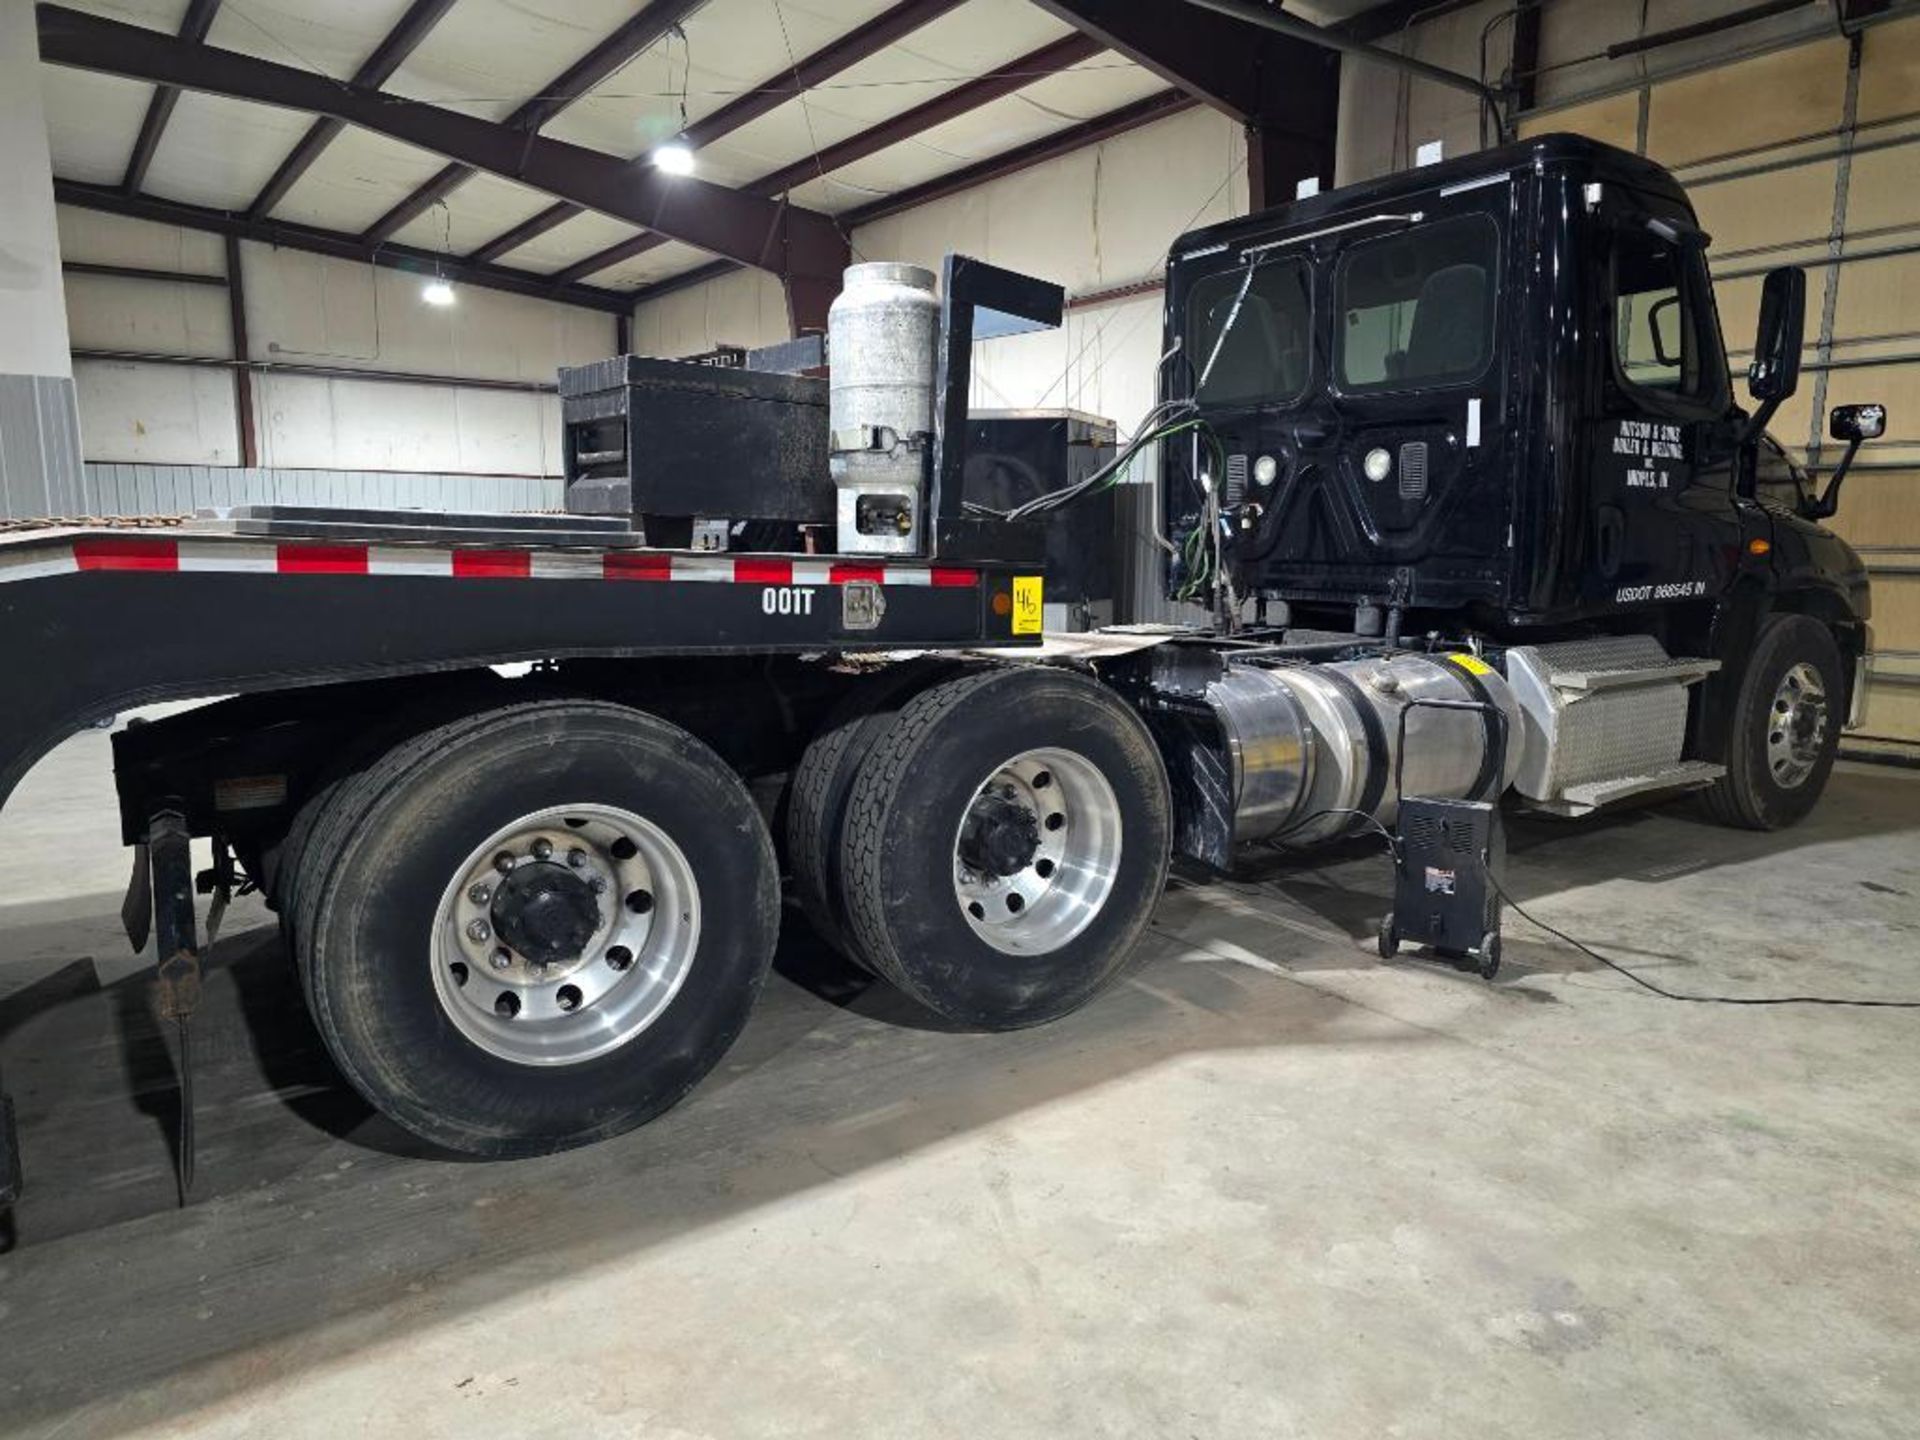 2010 Freightliner Tandem Axle Tractor, 615,000 Miles, 10-Speed Eaton, Wet Kit, 500-HP Detroit, Day C - Image 5 of 9